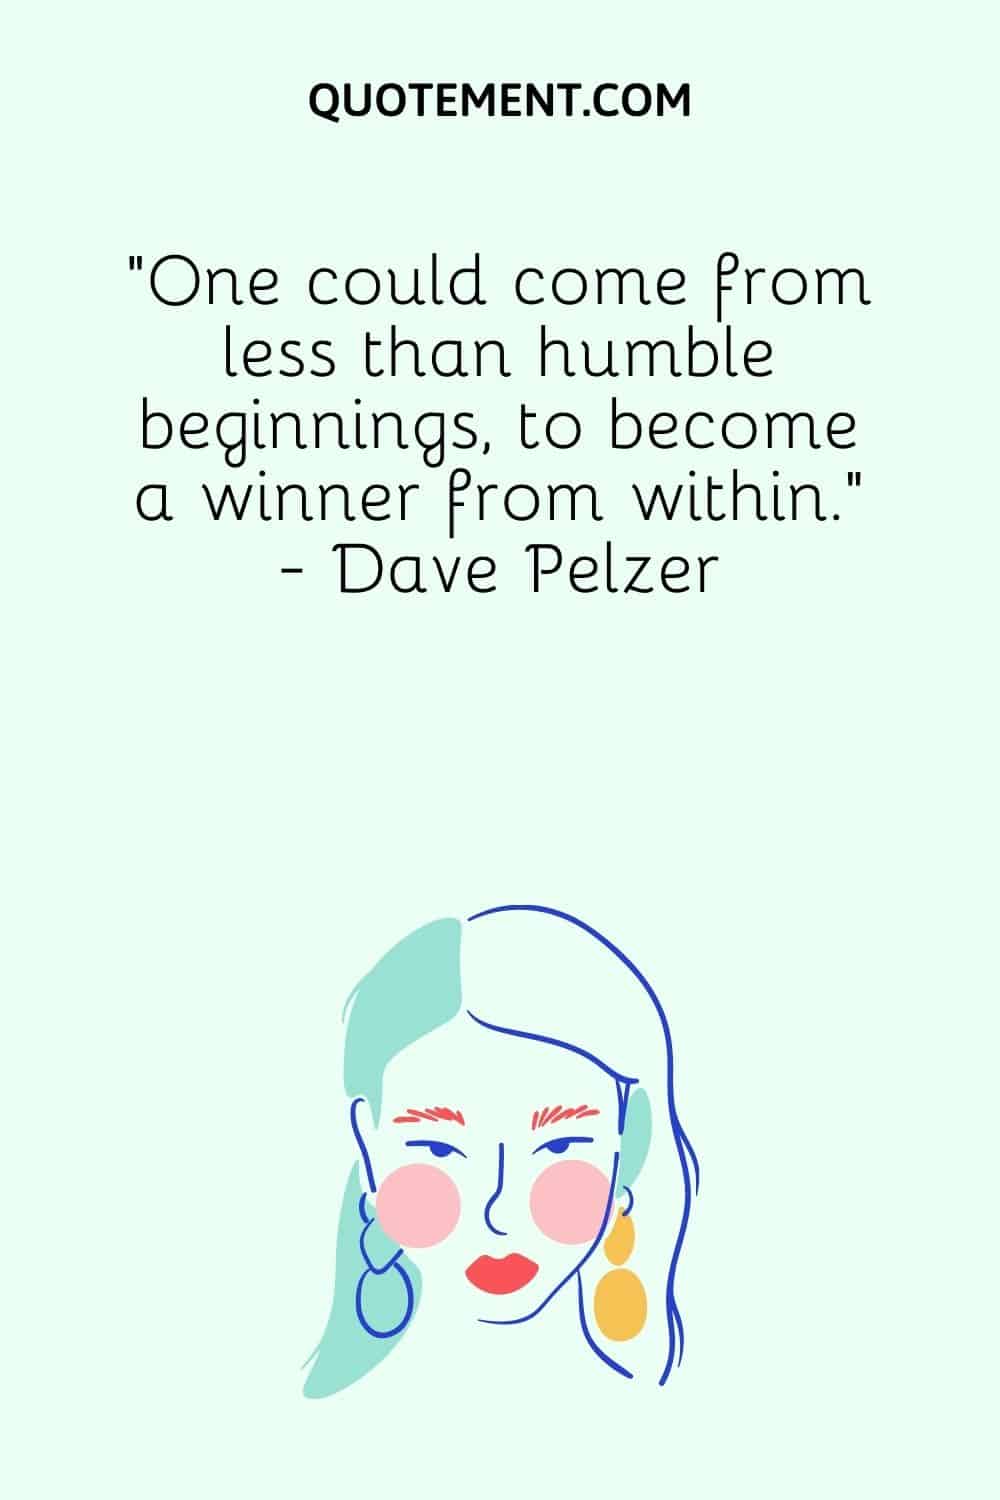 “One could come from less than humble beginnings, to become a winner from within.” - Dave Pelzer